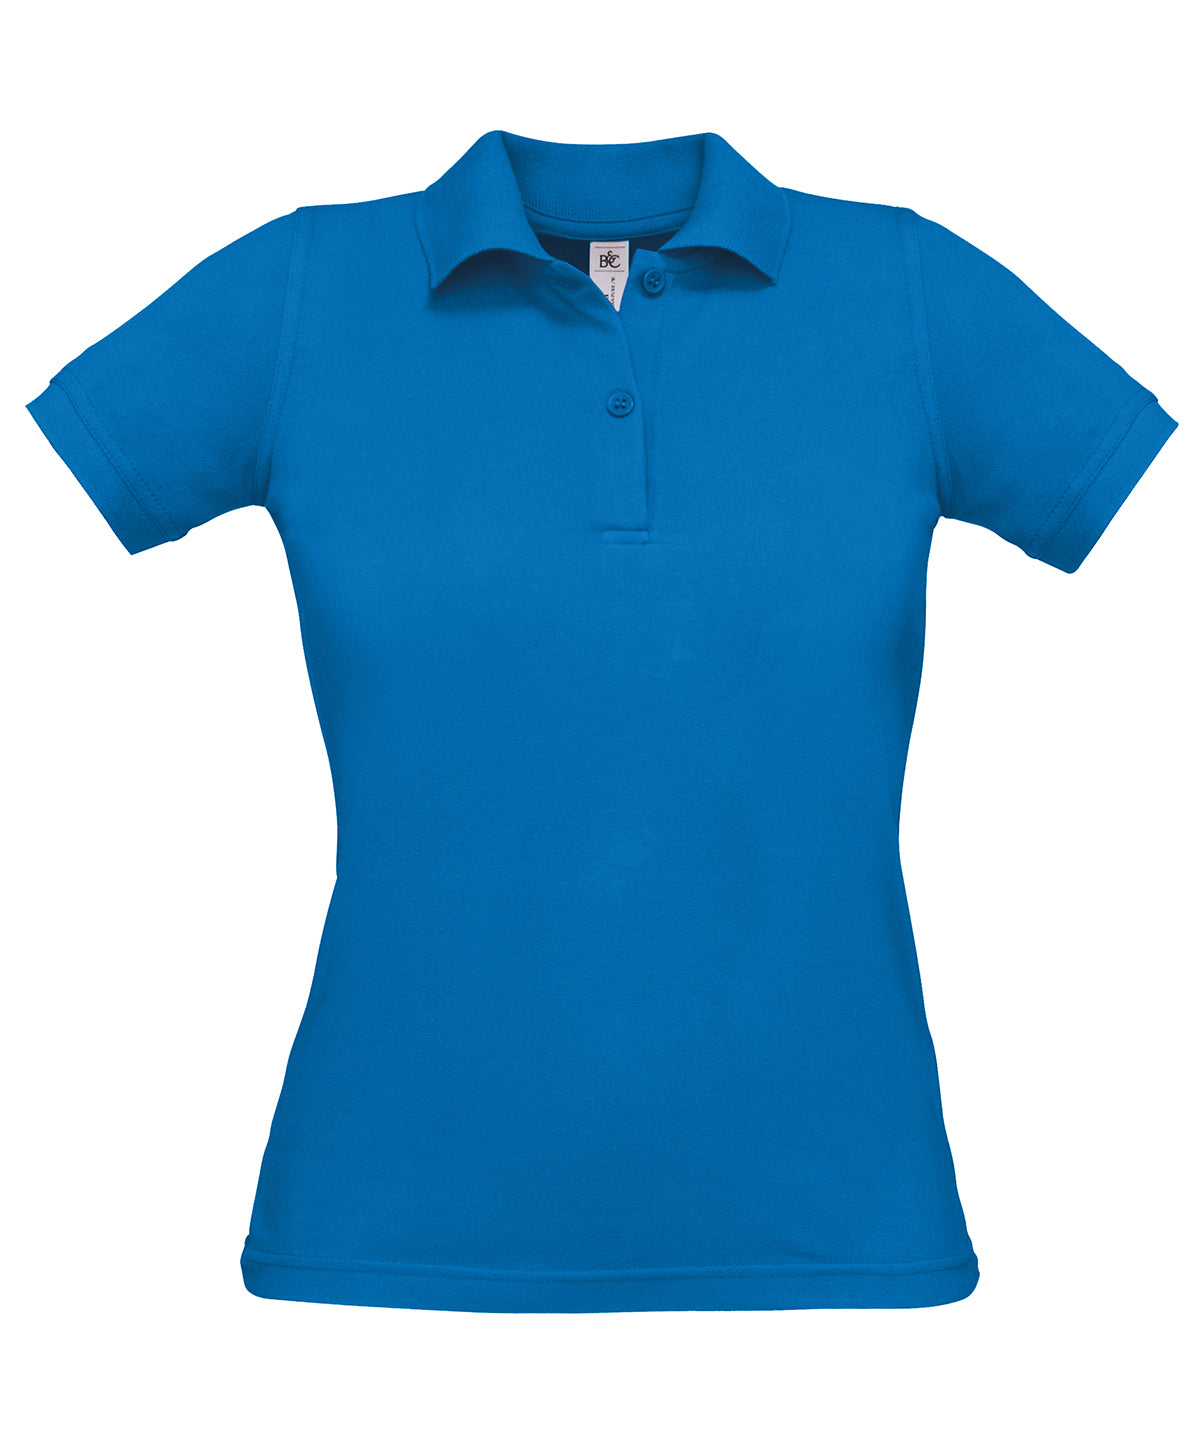 Personalised Polo Shirts - Mid Red B&C Collection B&C Safran pure /women